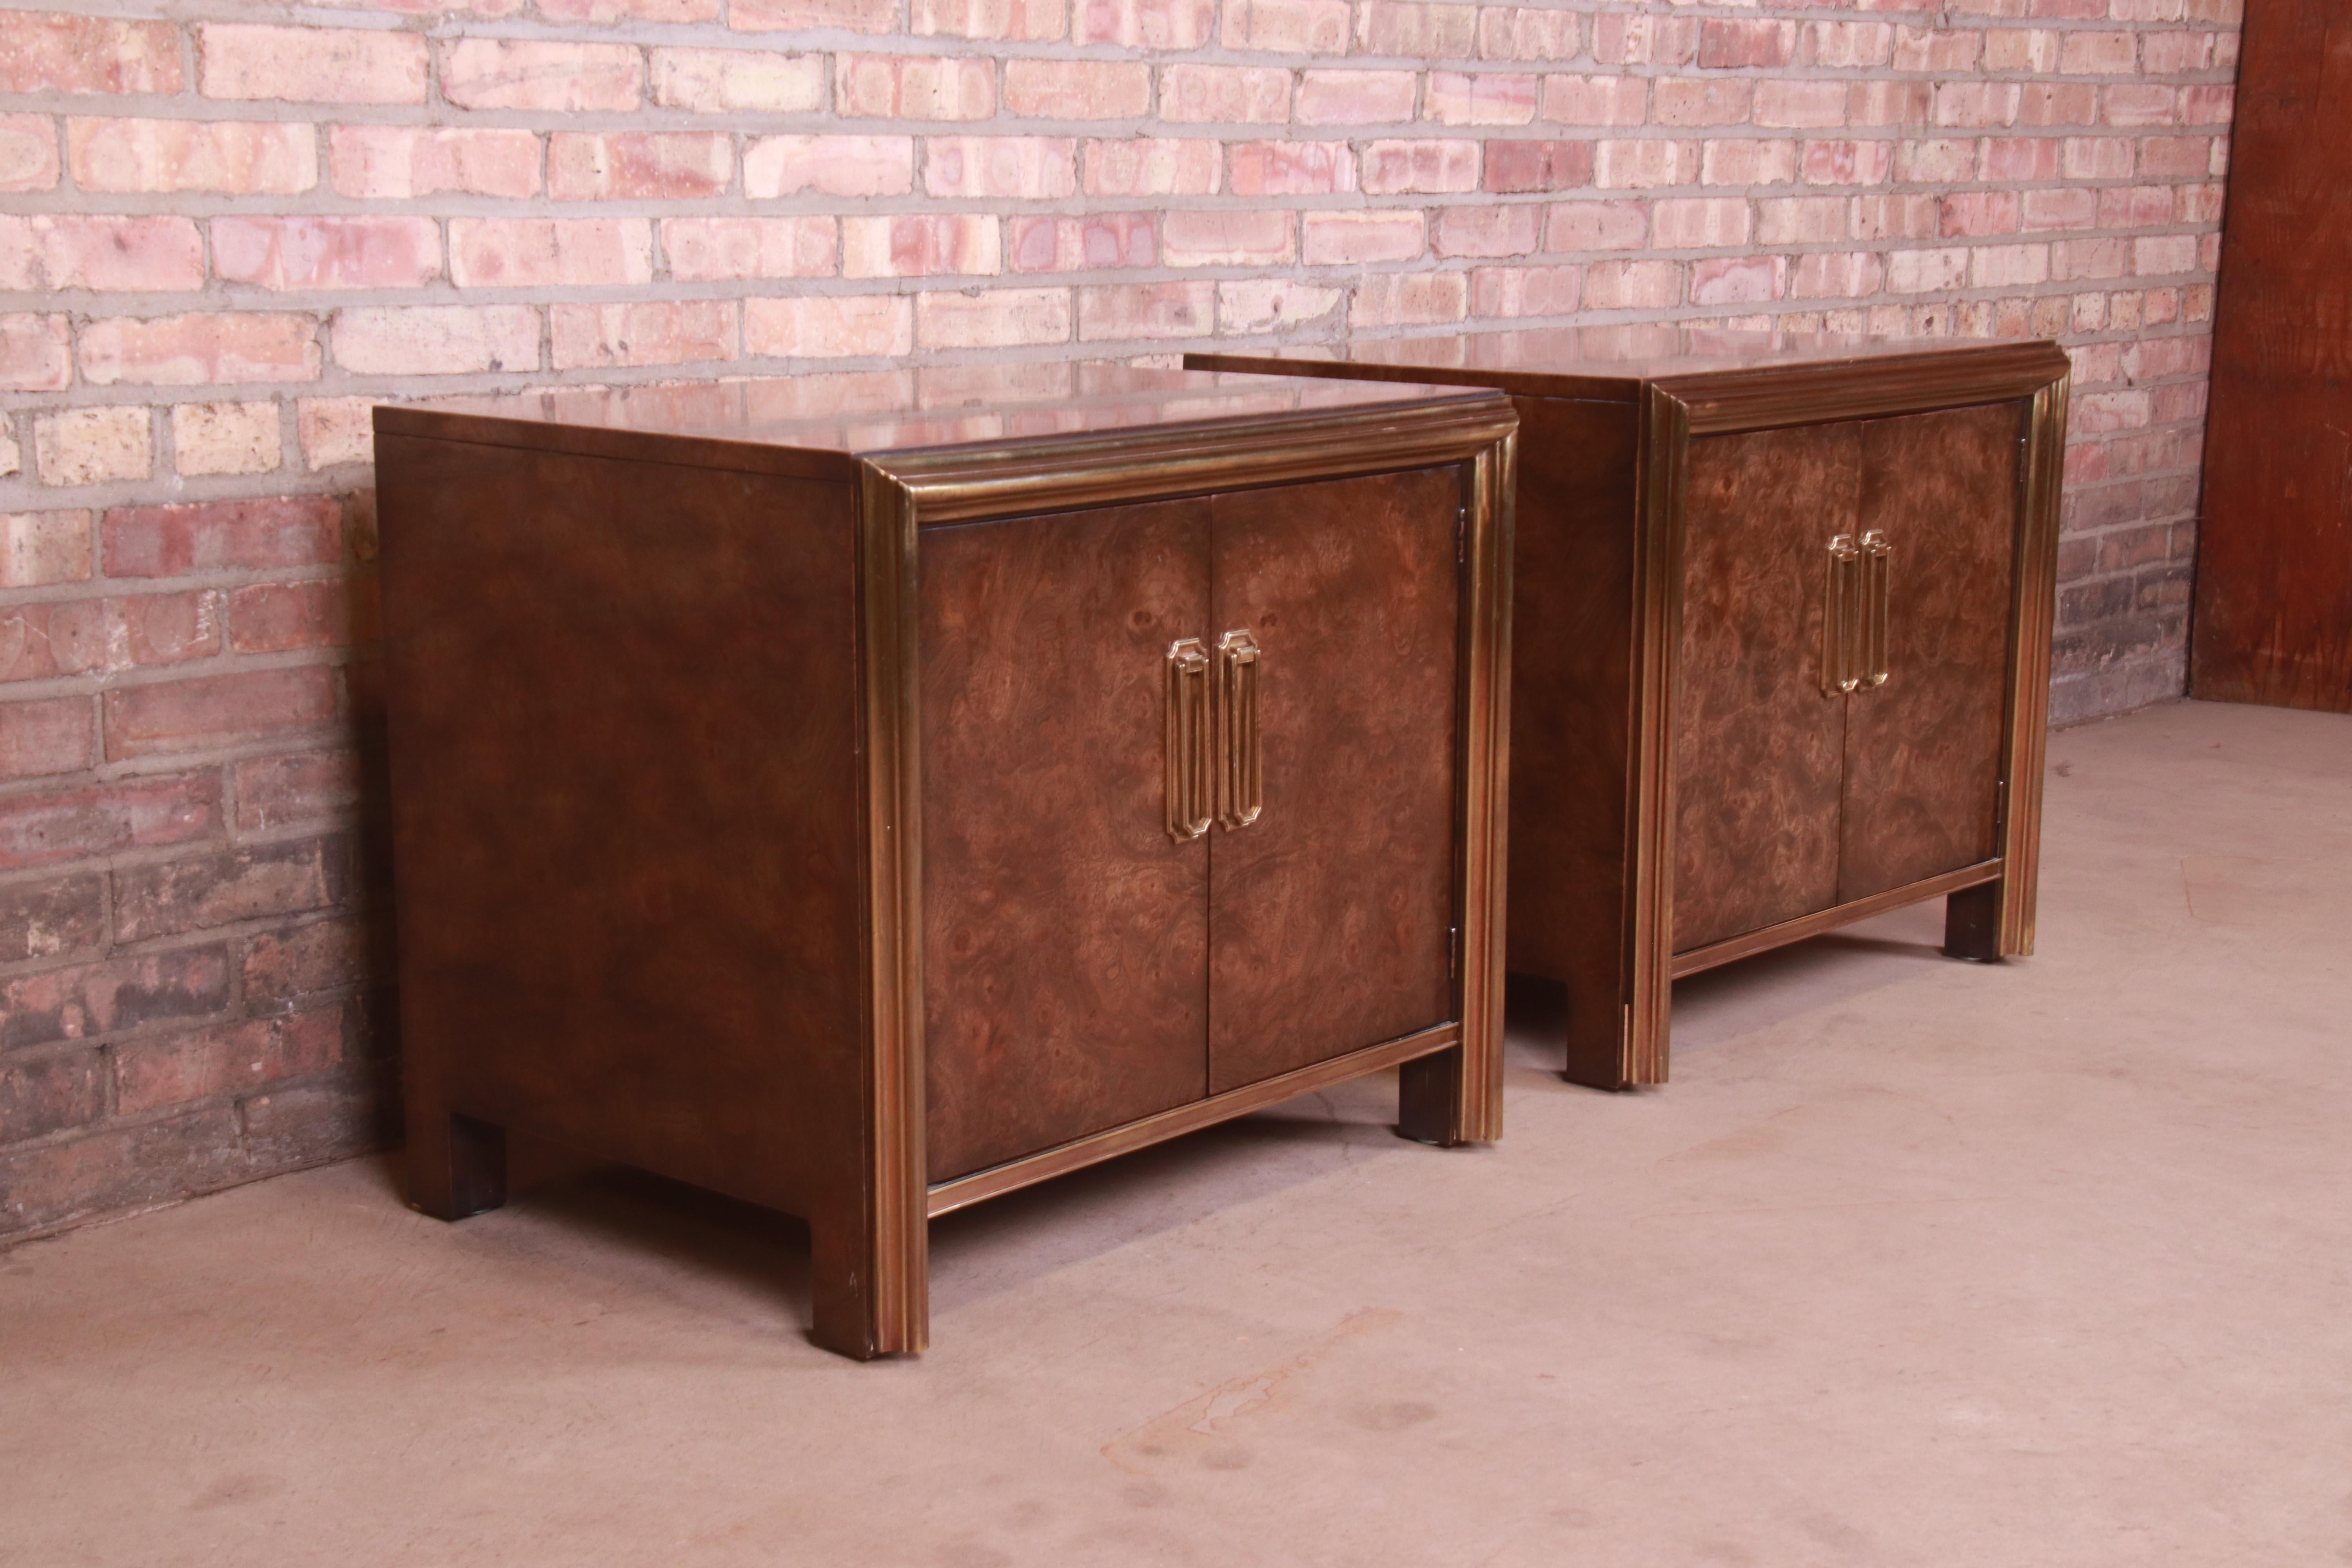 Mastercraft Hollywood Regency Burl Wood and Brass Nightstands, 1970s For Sale 1